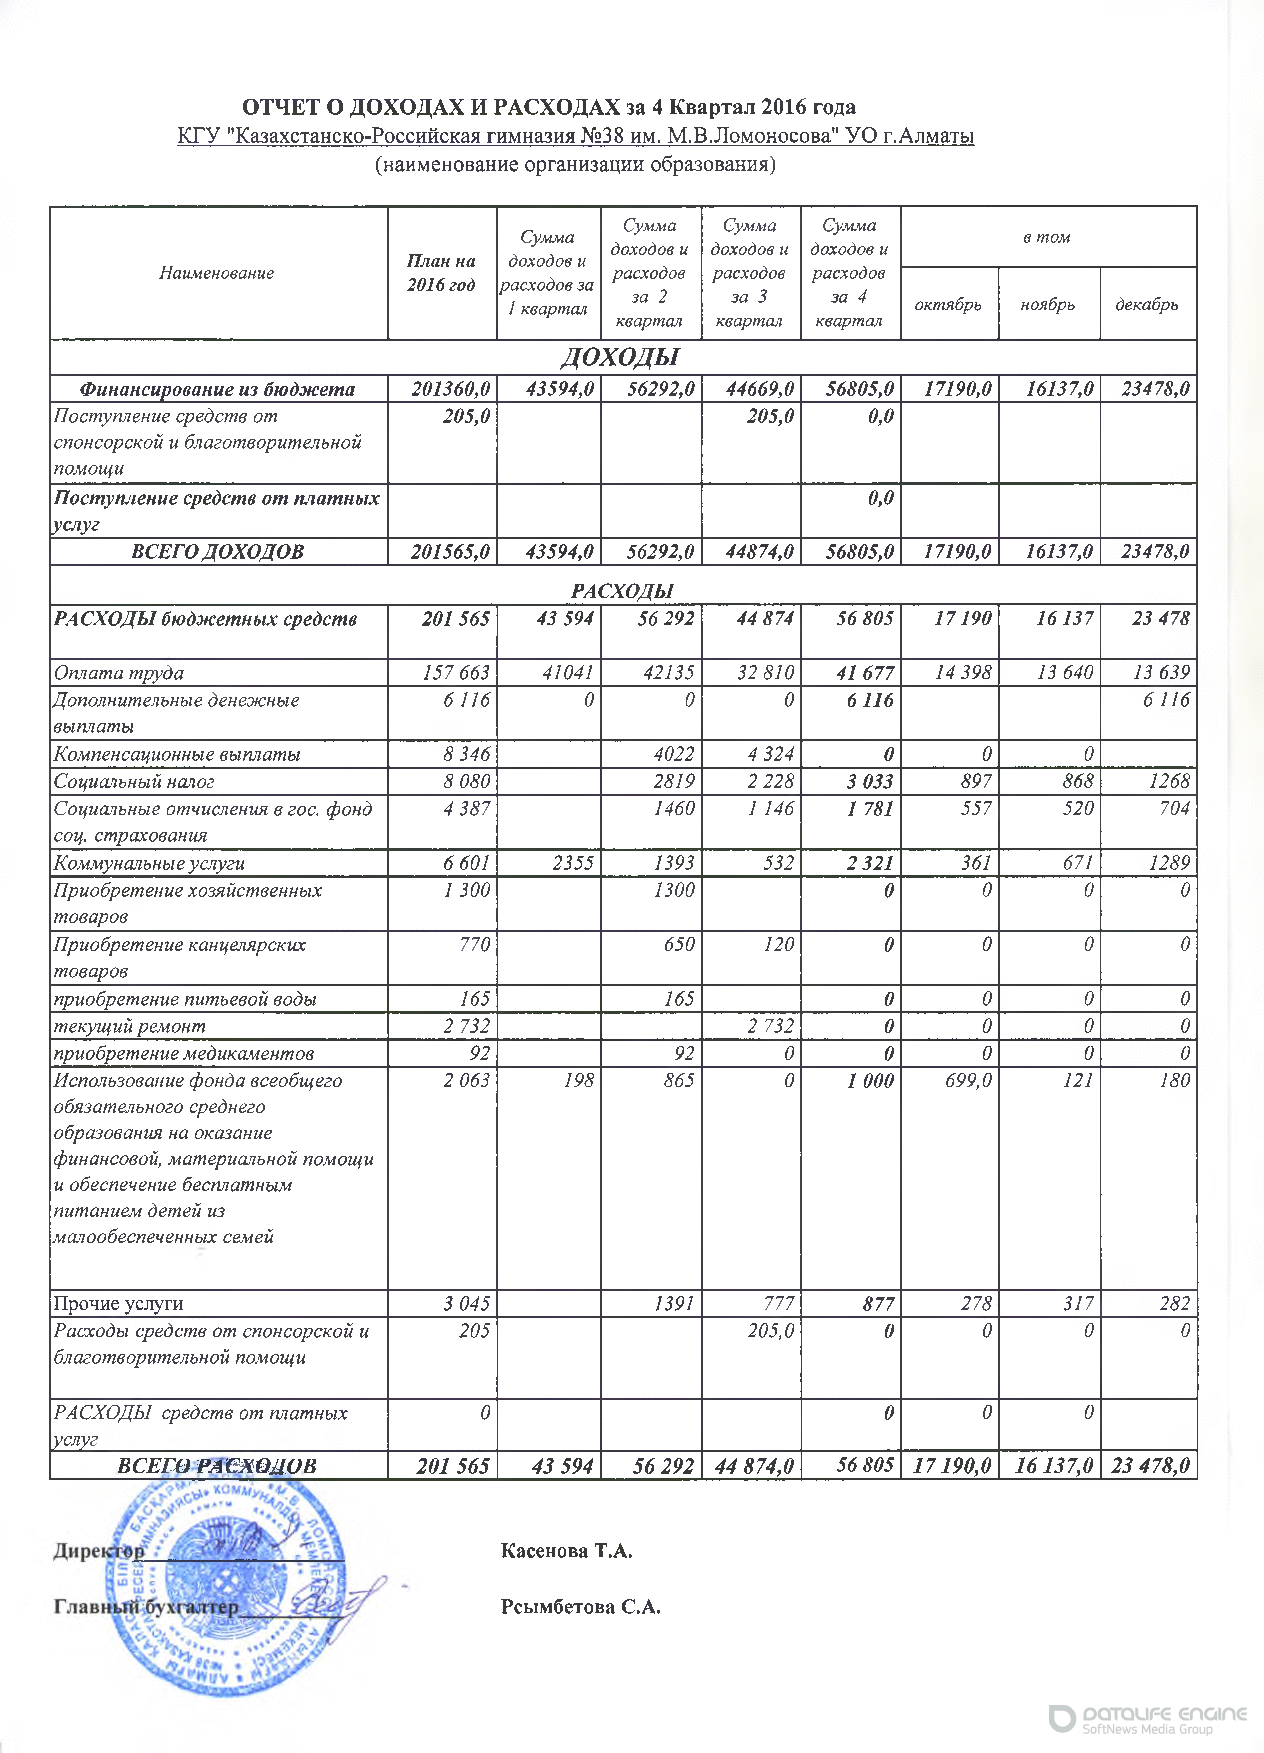 Statement of income and expenses за 4 квартал 2016 г